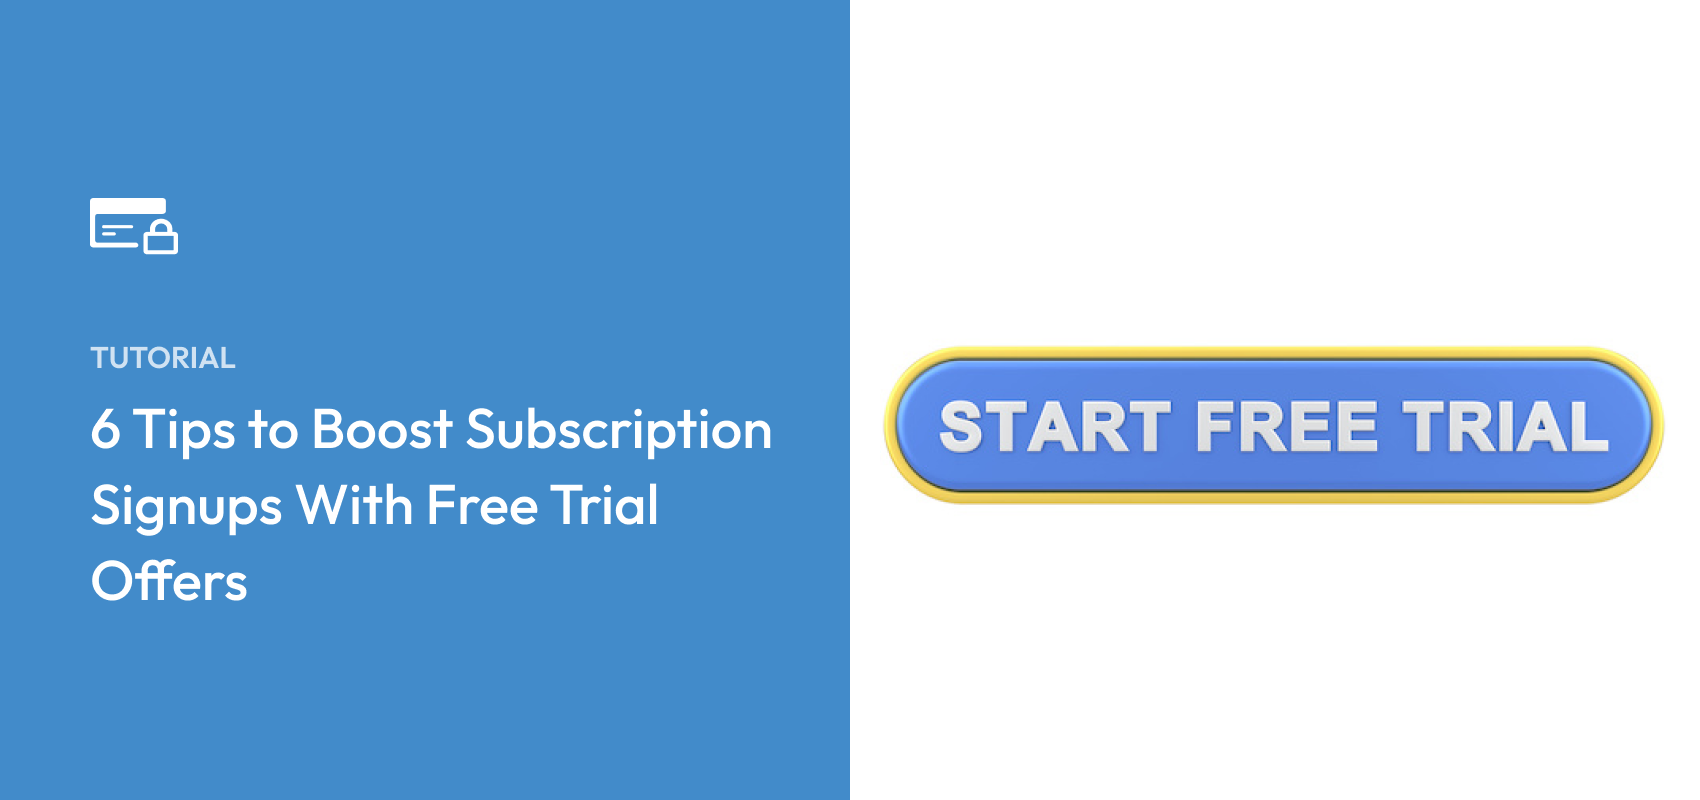 Trial offers for customers